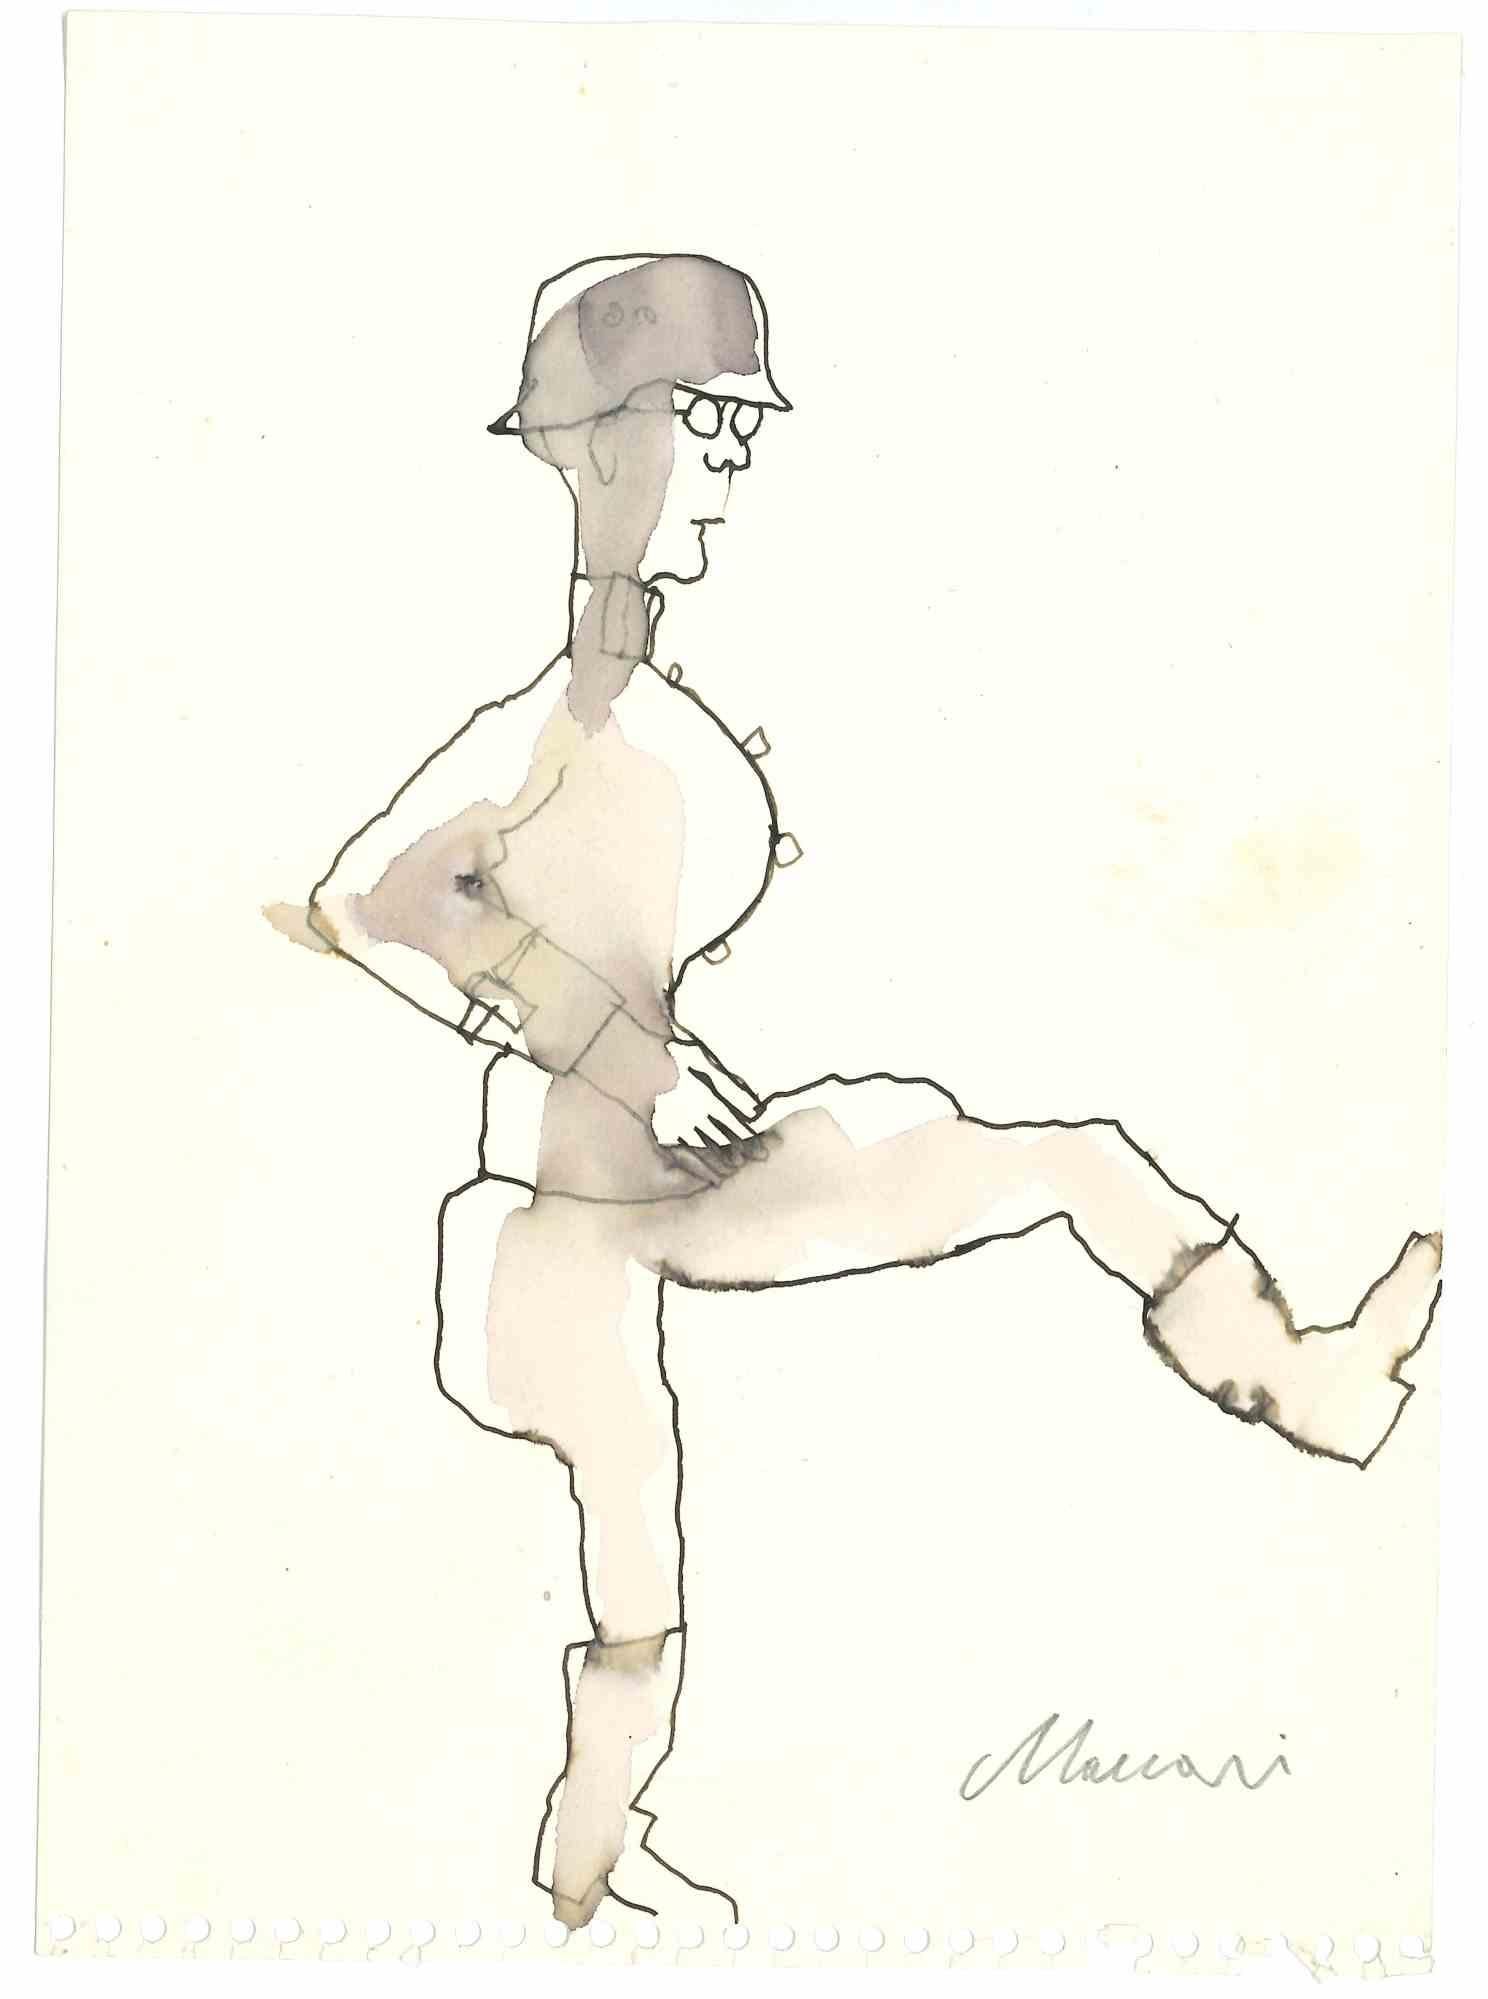 Soldier is an ink and watercolor drawing realized by Mino Maccari  (1924-1989) in the Mid-20th Century.

Hand-signed.

Good conditions with slight foxing.

Mino Maccari (Siena, 1924-Rome, June 16, 1989) was an Italian writer, painter, engraver and